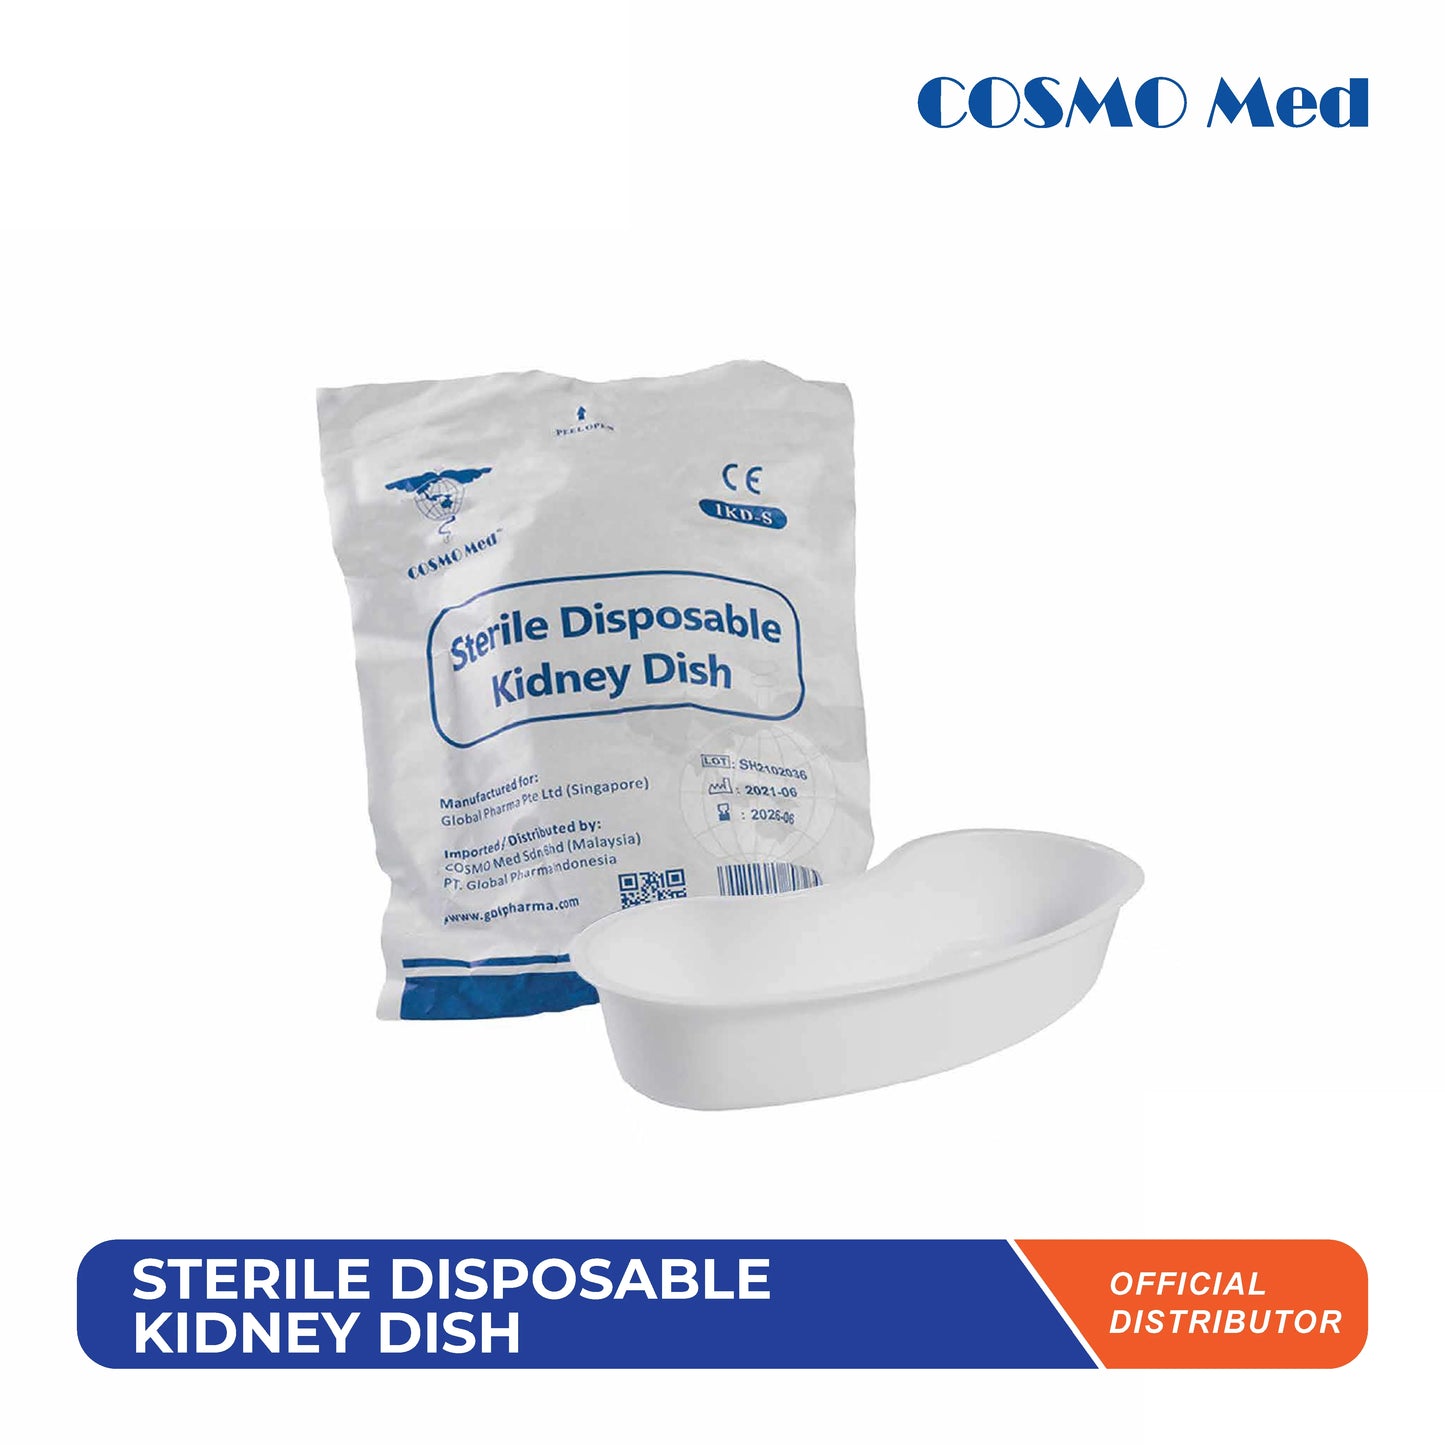 Sterile Disposable Kidney Dish